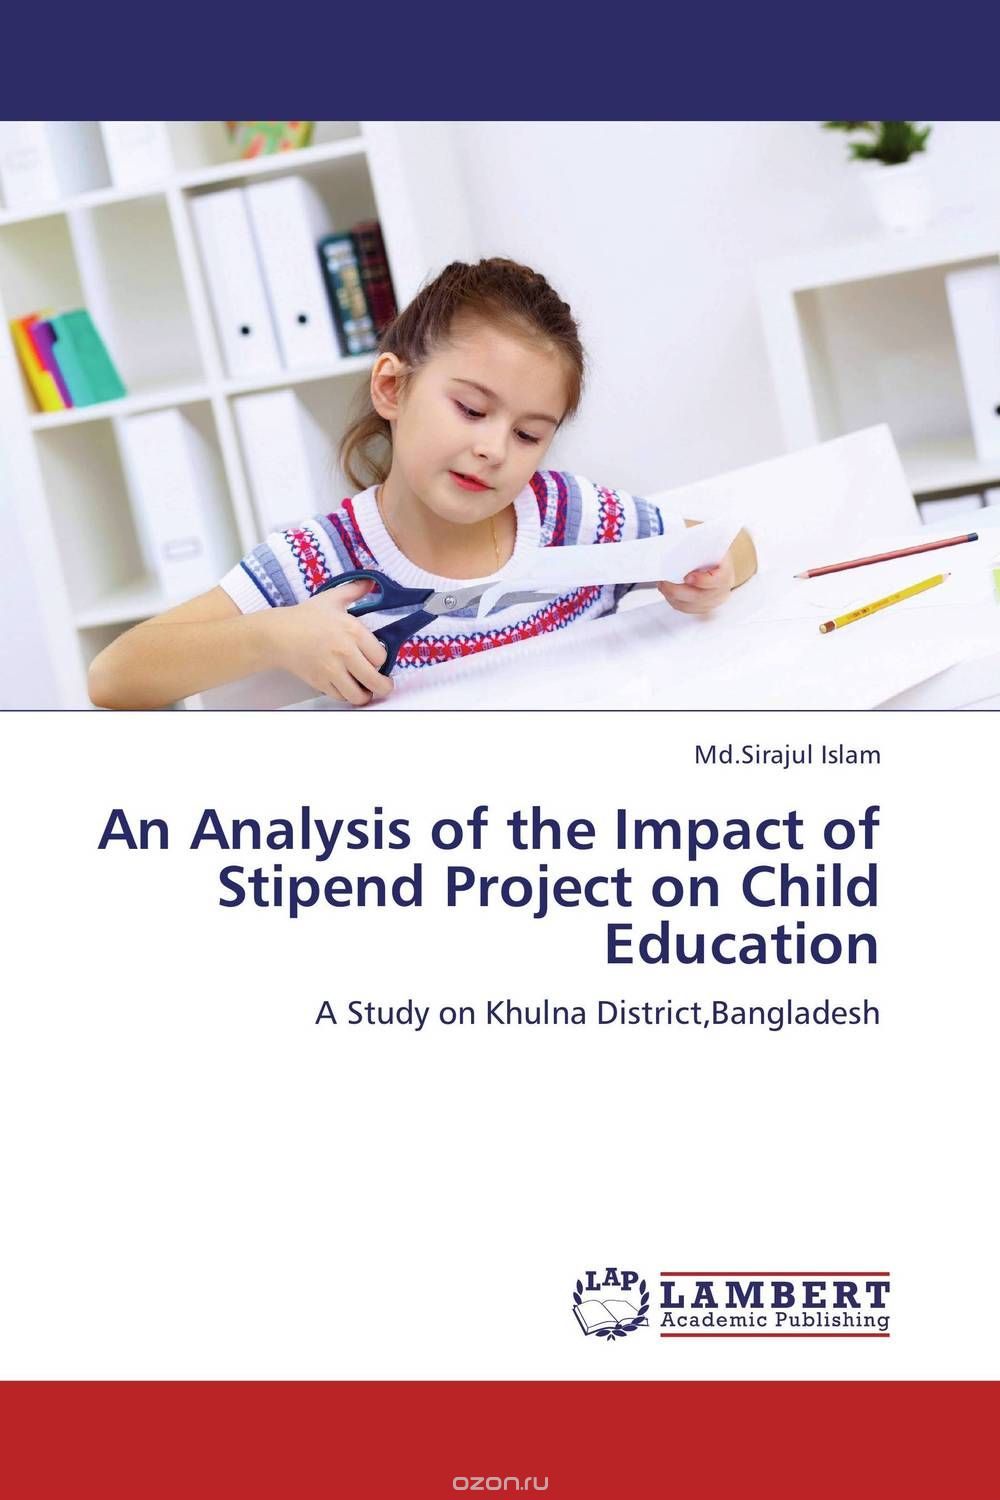 An Analysis of the Impact of Stipend Project on Child Education